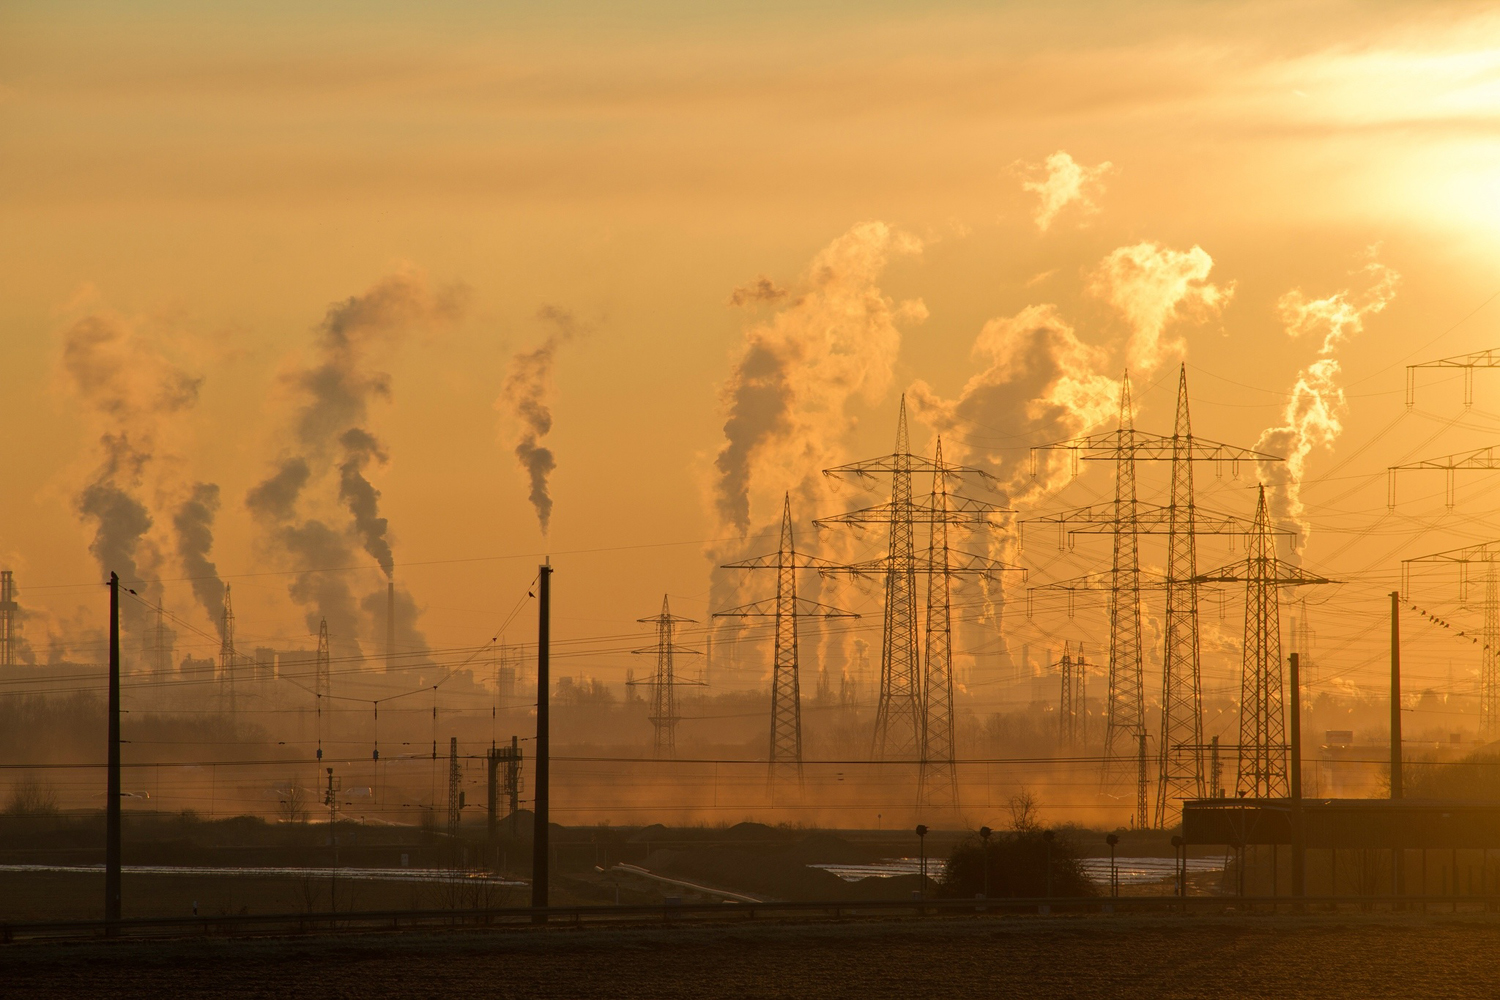 Scientists say cutting carbon emission isn't enough to address climate change. (Pixabay)